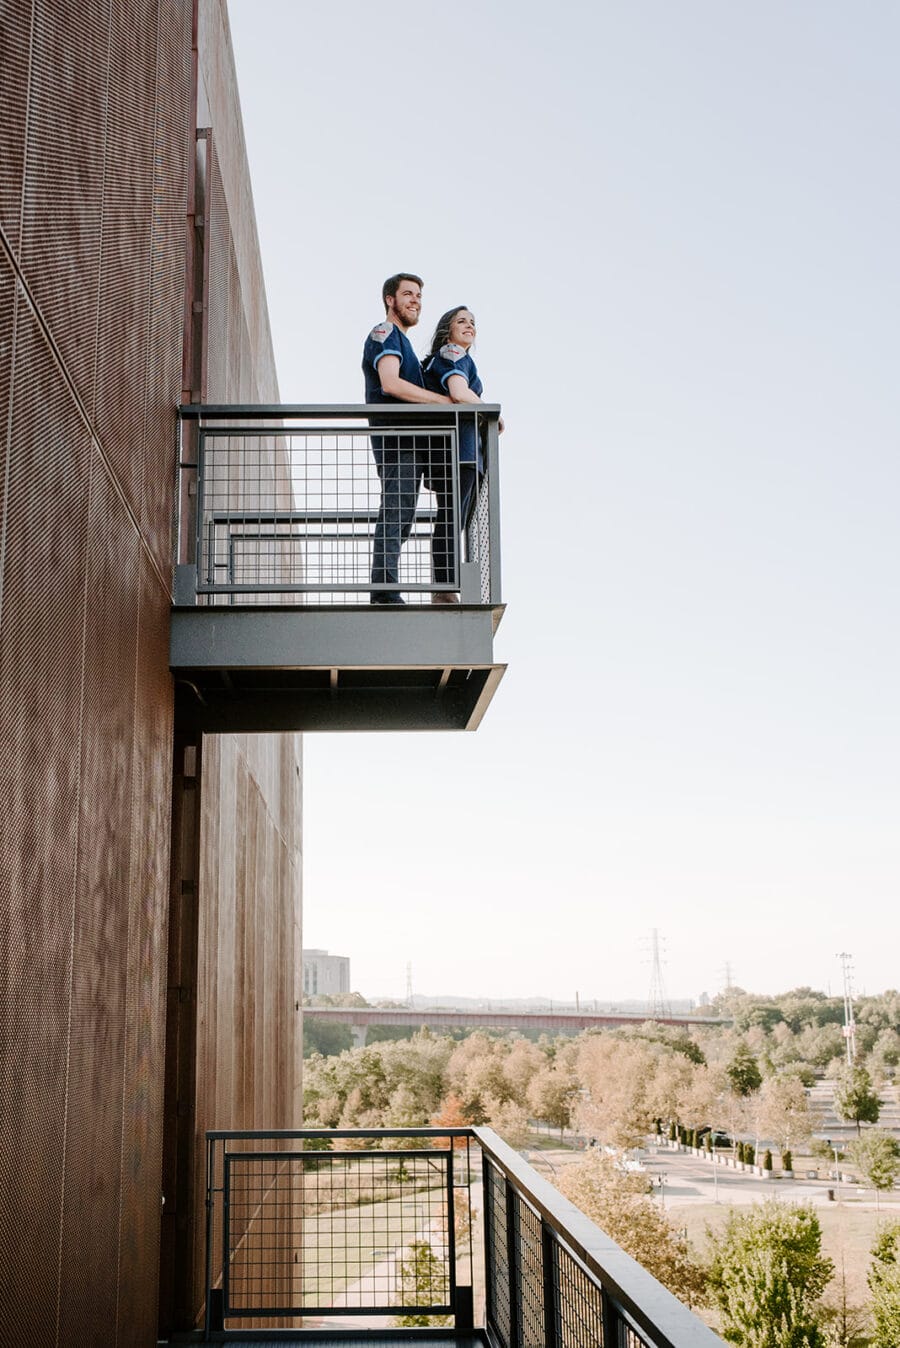 Fun Downtown Engagement Shoot from Sara Bill Photography featured on Nashville Bride Guide